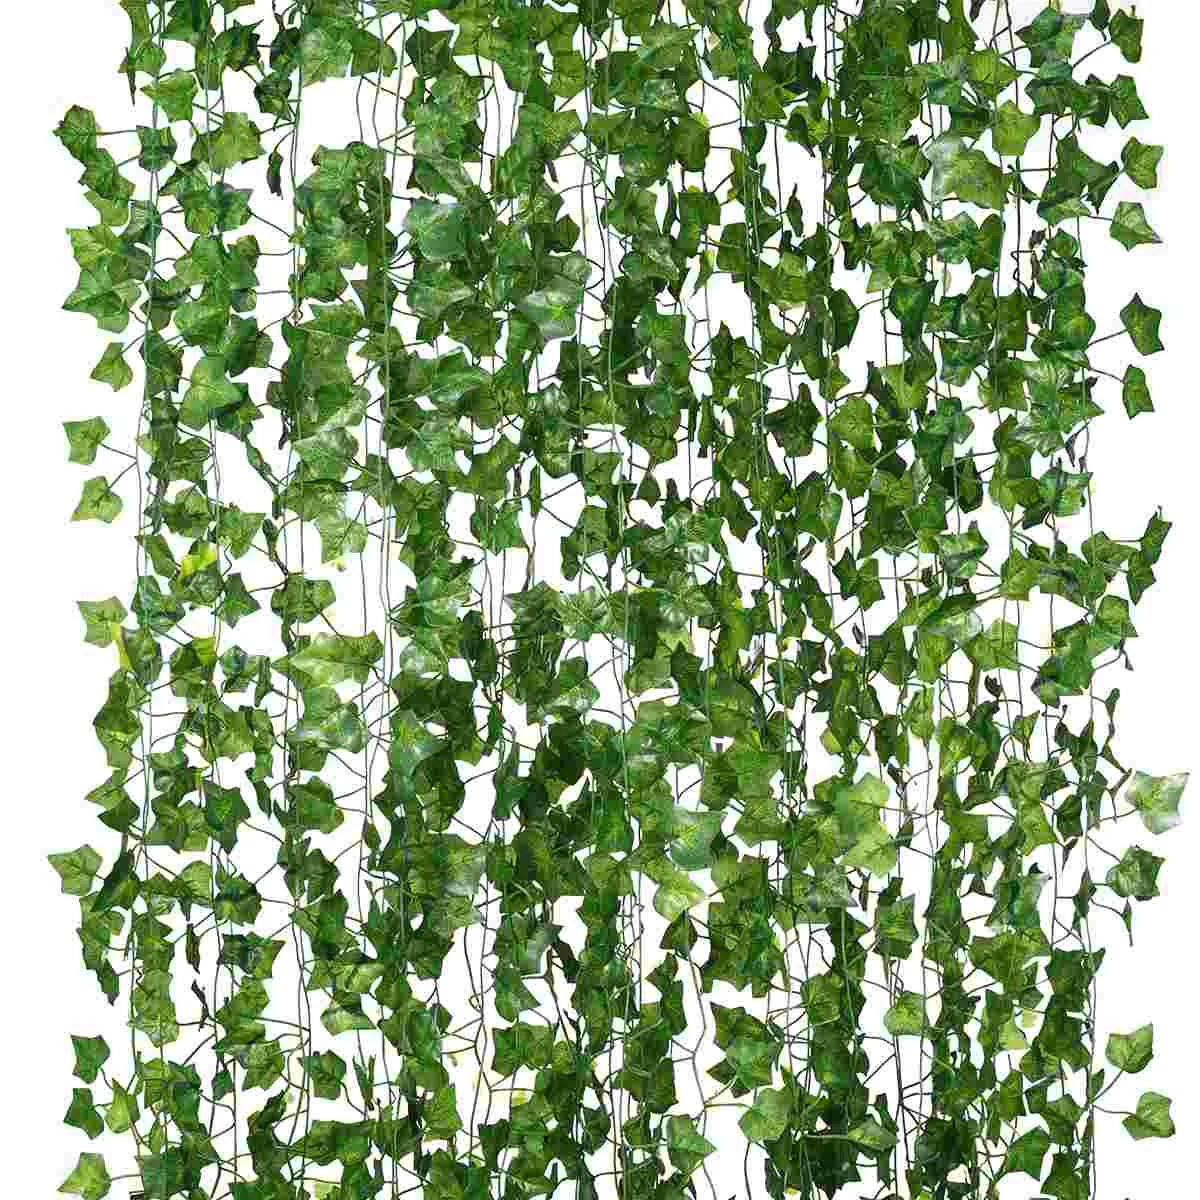 

18pcs Artificial Ivy Leaf Vine with 50pcs Cable Ties Greenery Hanging Garland Foliage Flowers for Home Kitchen Garden Office